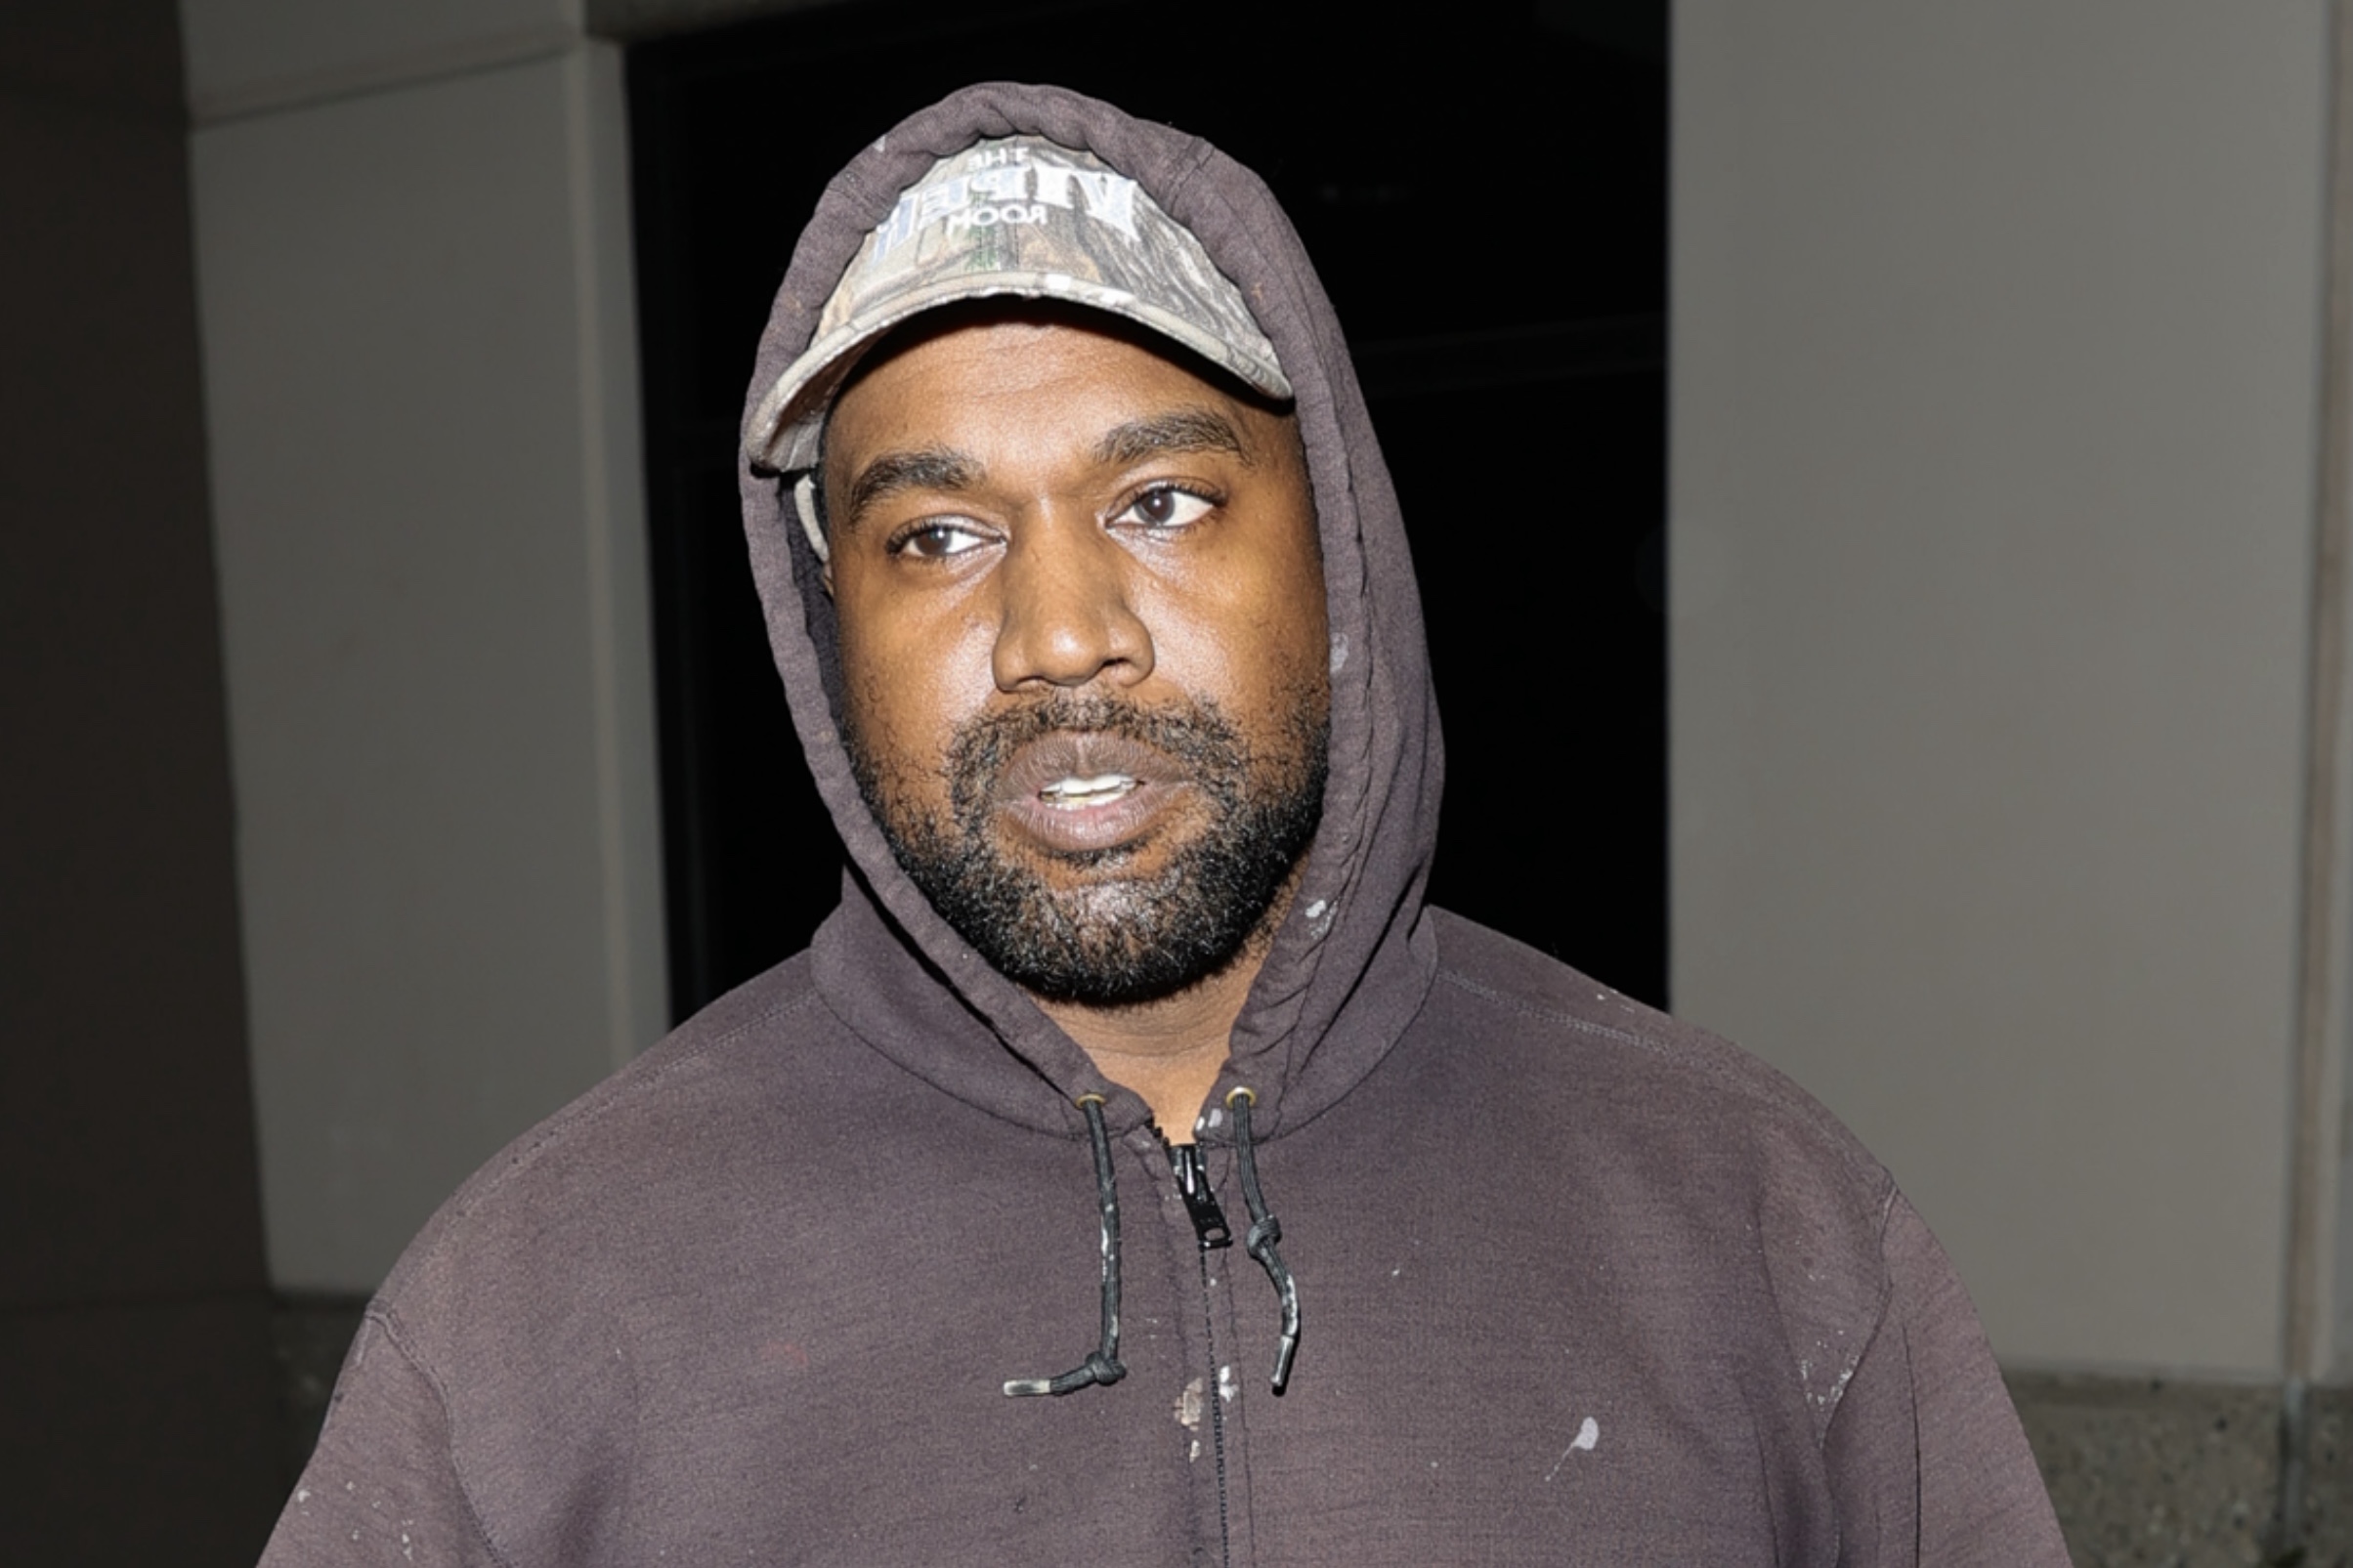 Ye's Yeezy clothing brand owes California $600,000, according to state tax  liens